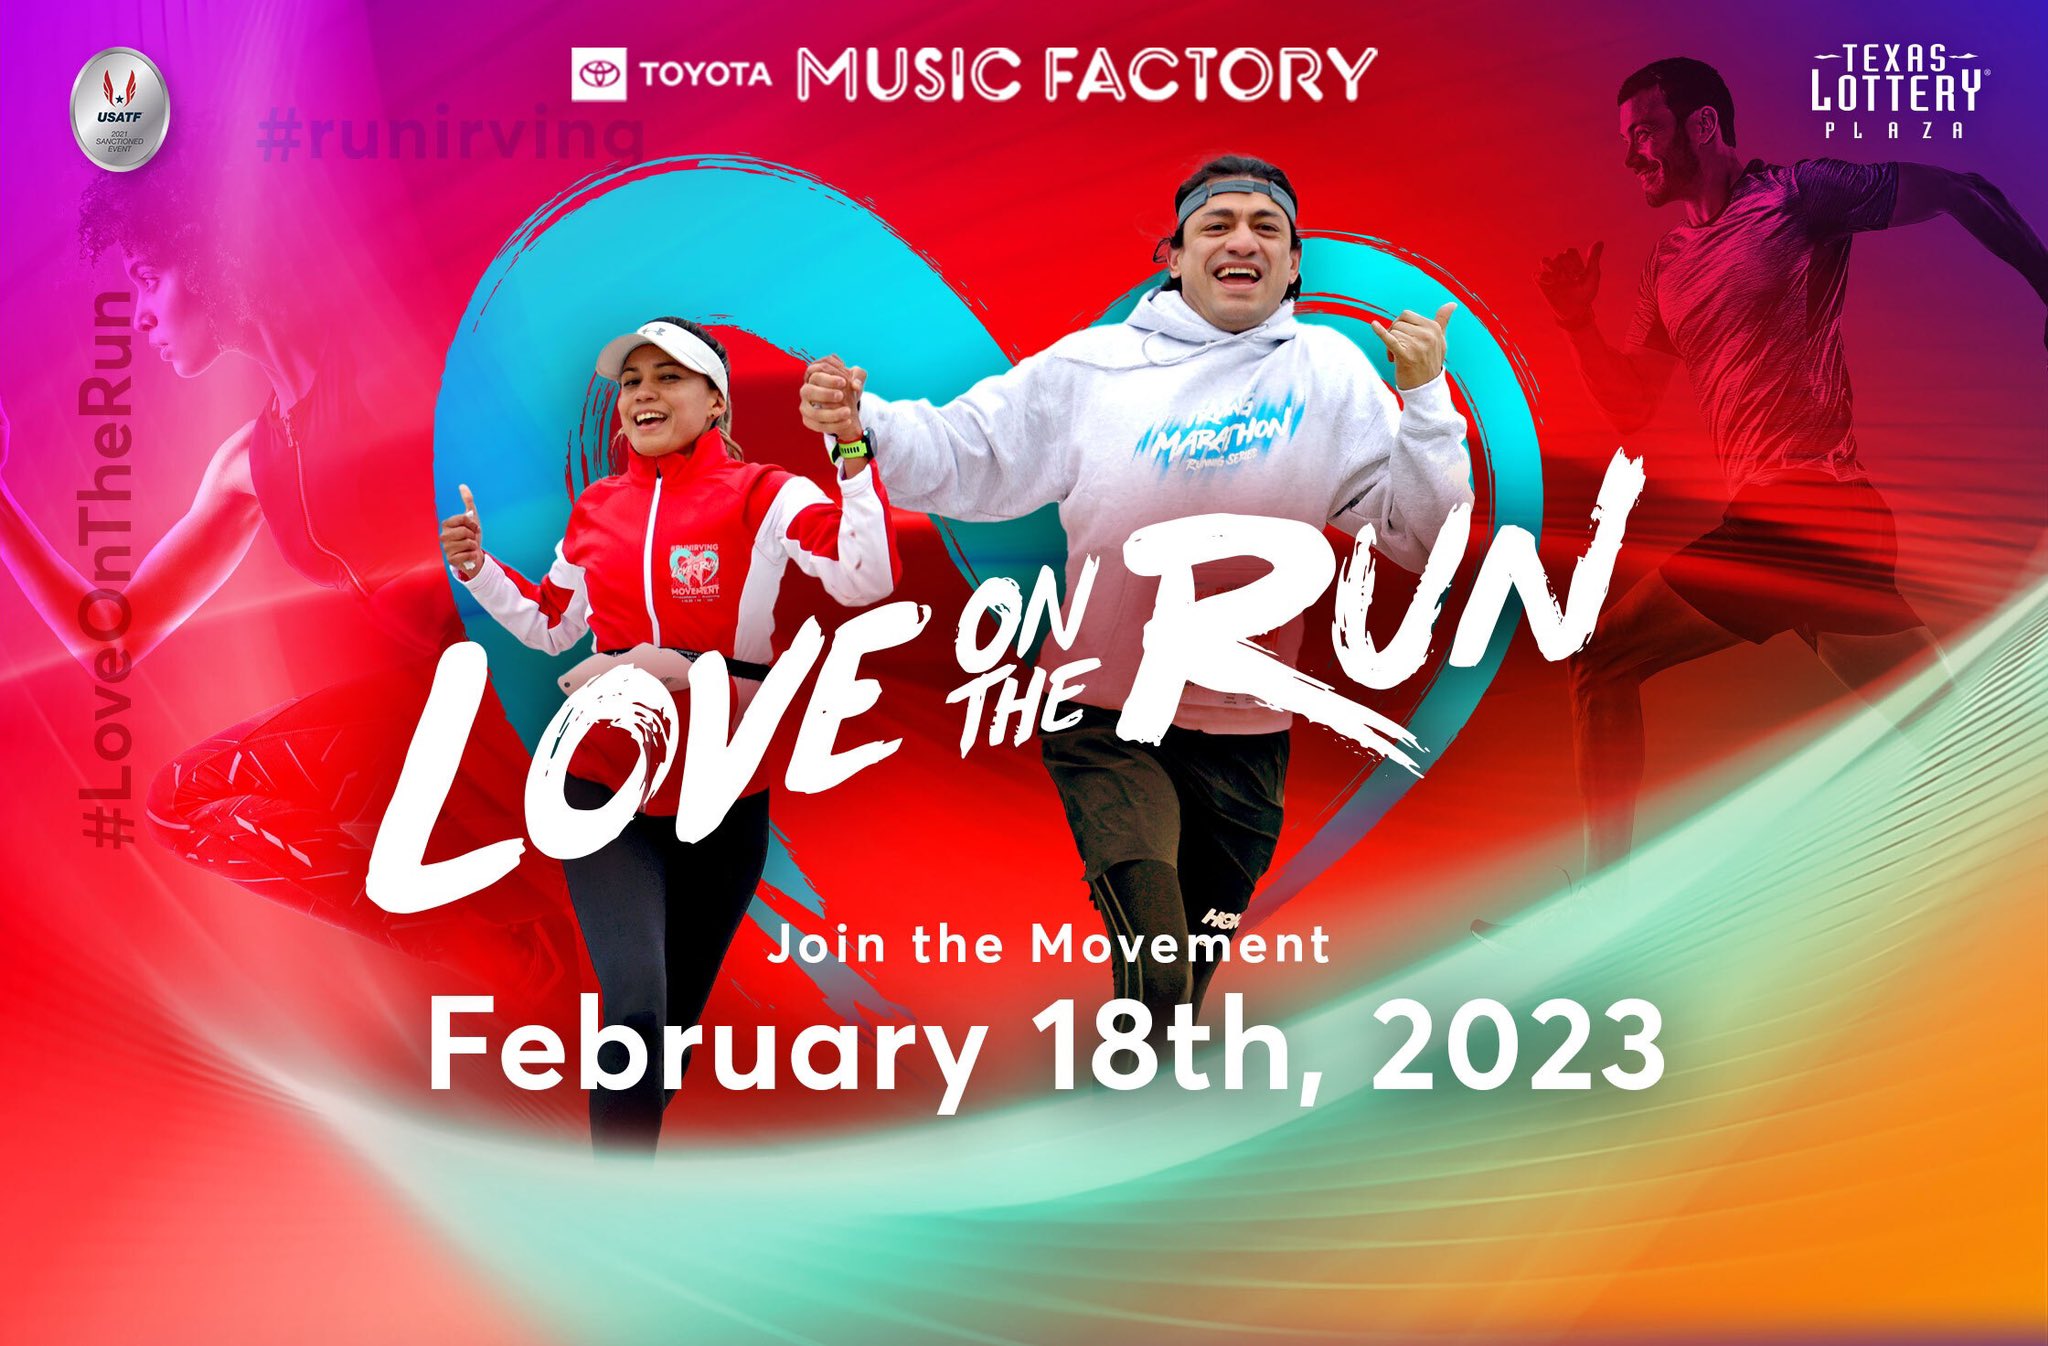 Love On The Run Half Marathon in Irving at The Plaza at Toyota Music